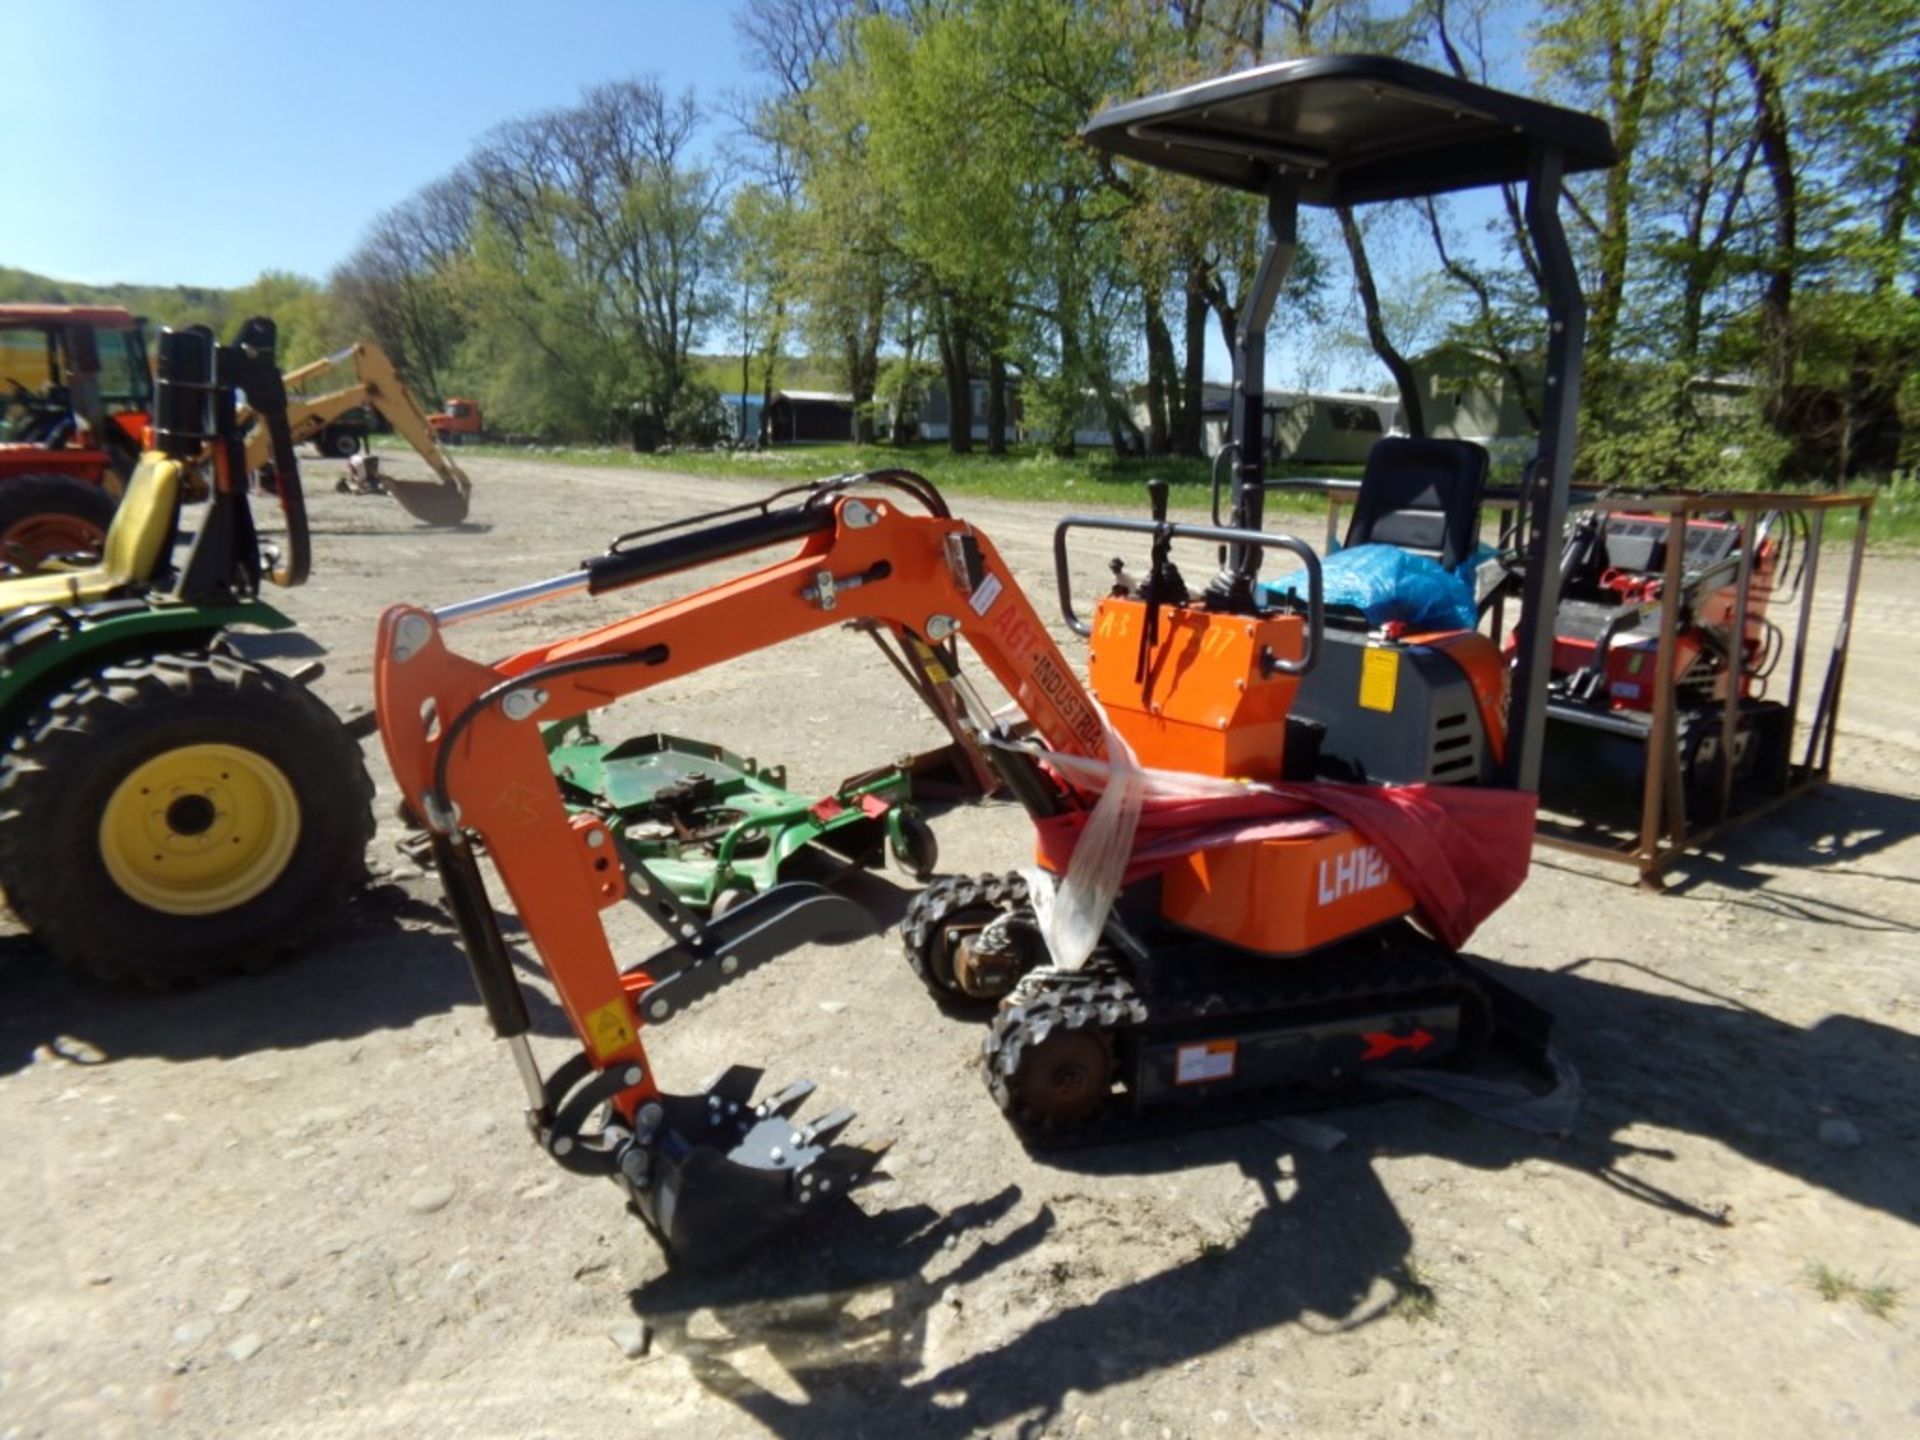 New AGT Industrial LH12R Mini Excavator with Open Cab, Stationary Thumb, Grader Blade, Gas Engine,